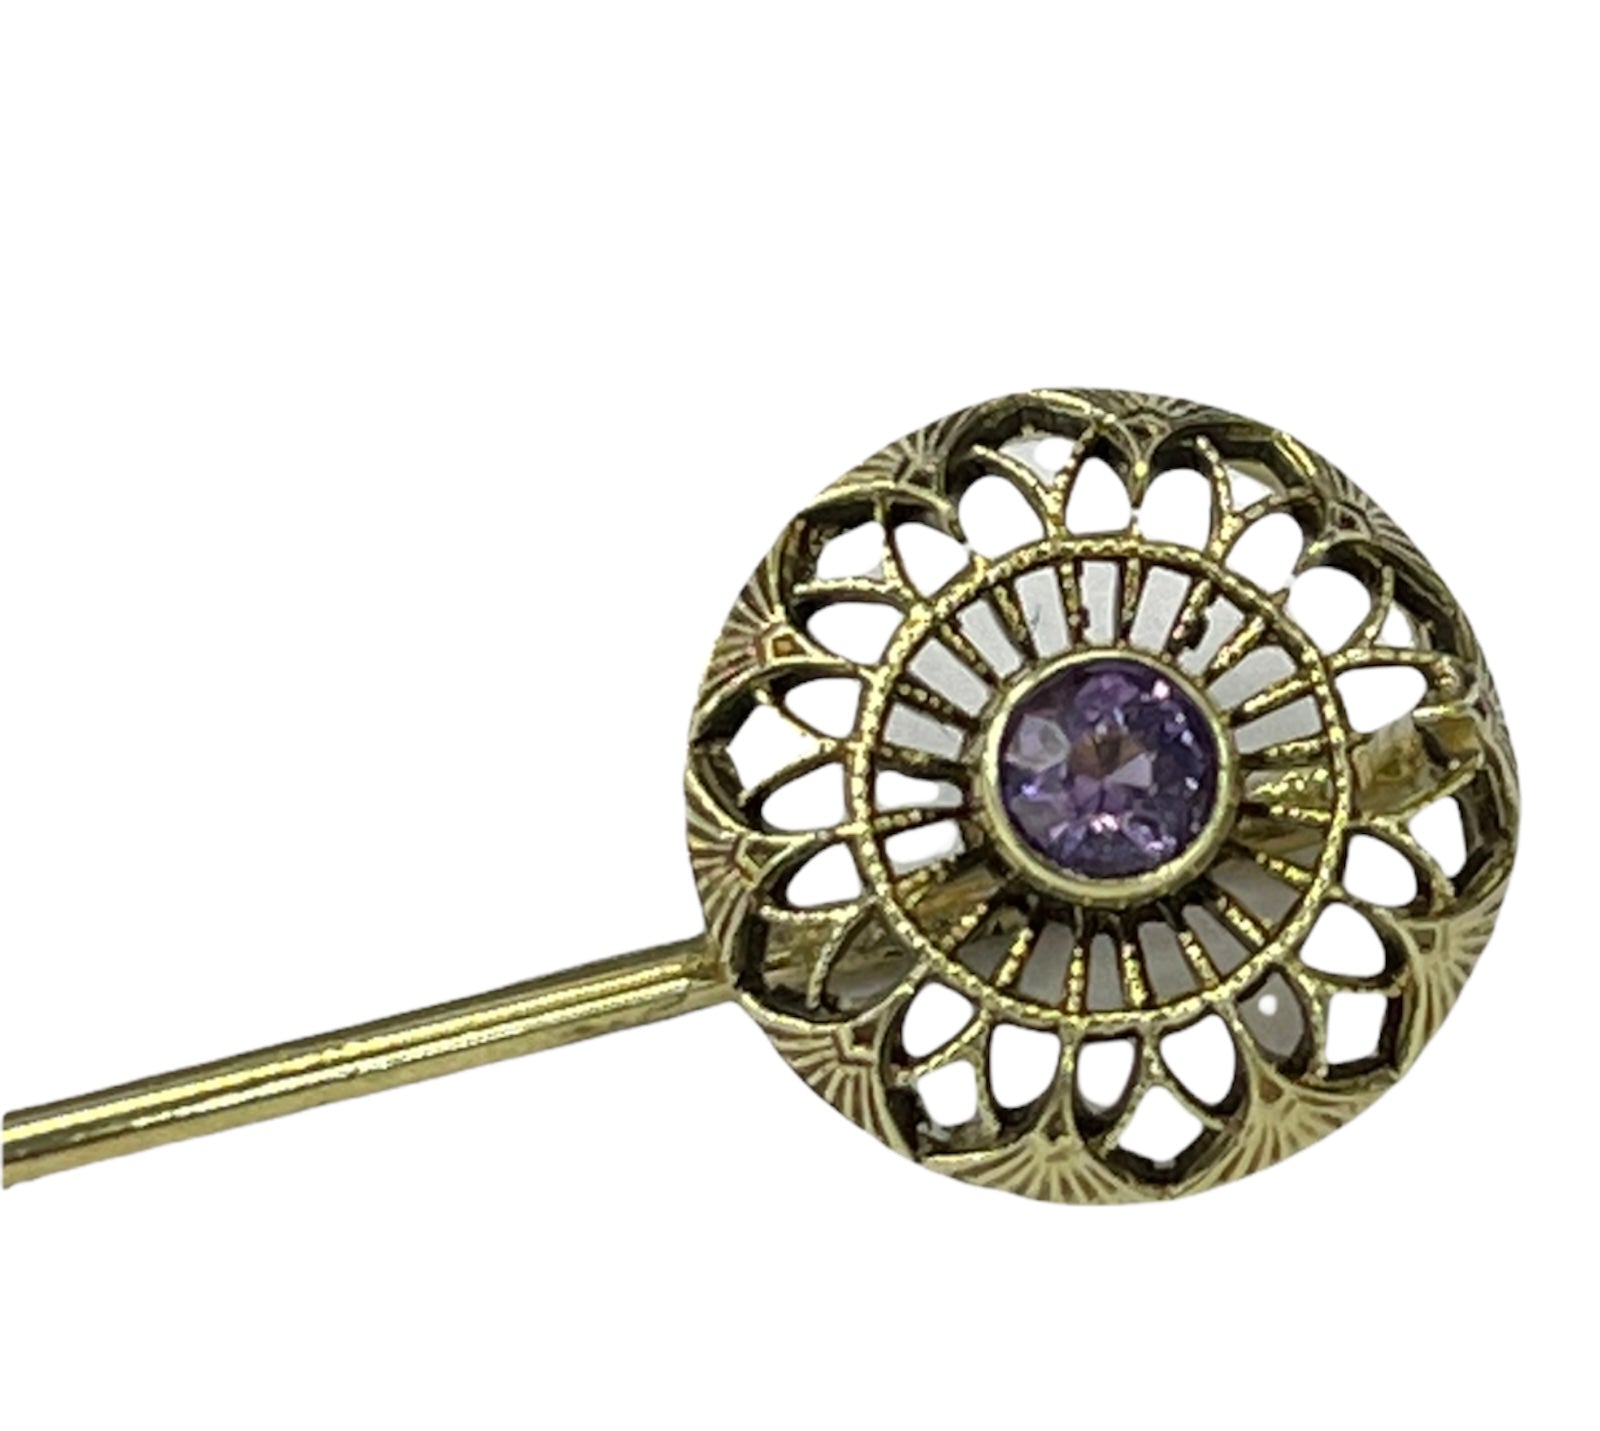 Women's Vintage Pin Yellow Gold with Amethyst Accents